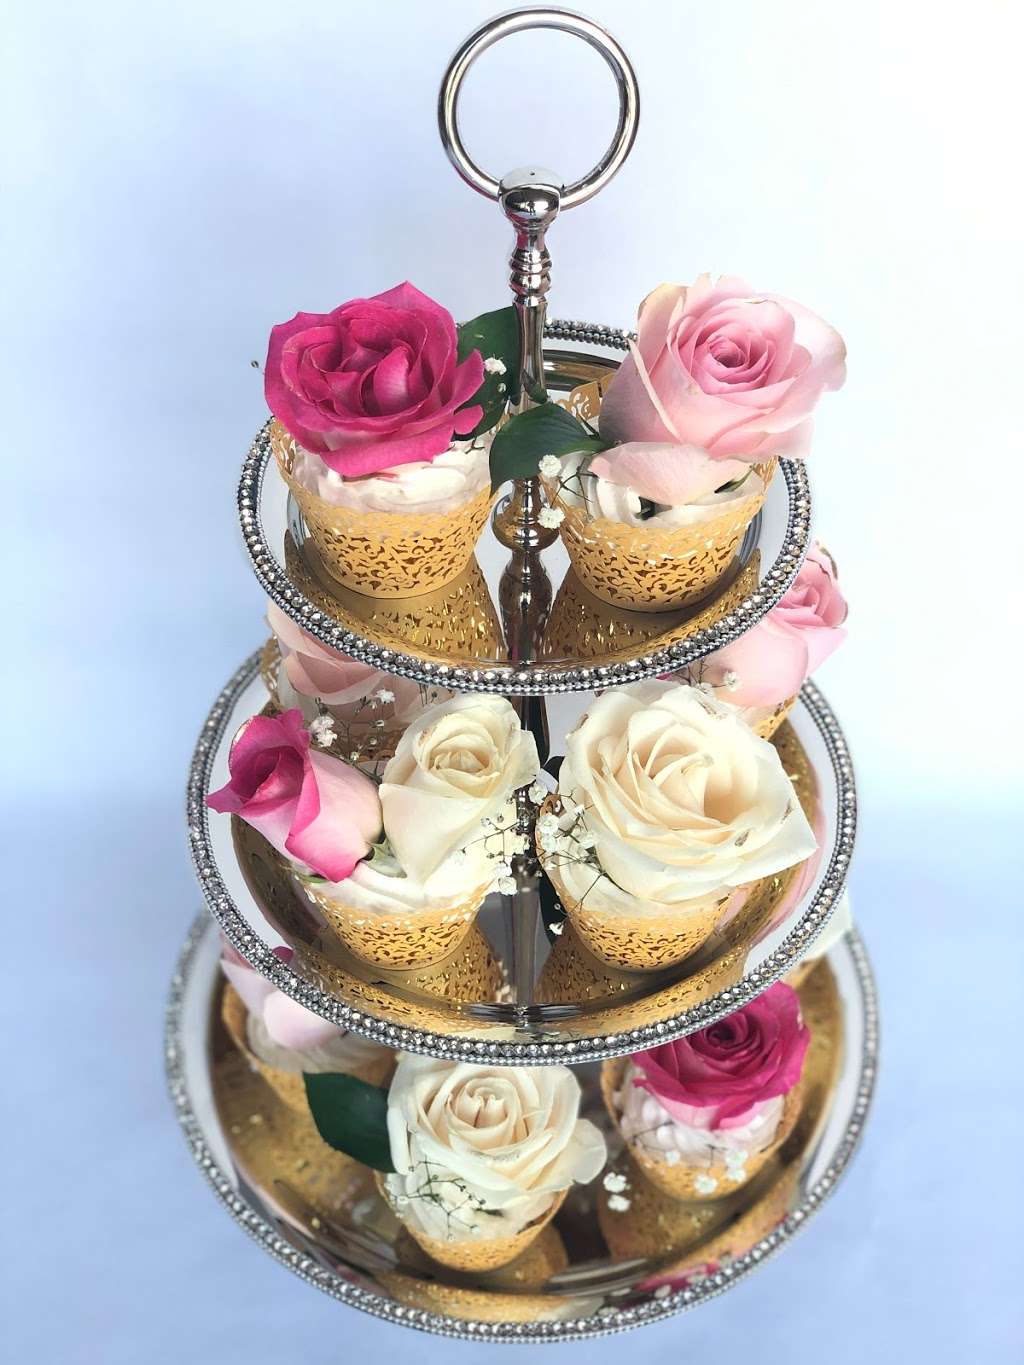 Cakes By Shael | 1200 NW 106th Ave, Plantation, FL 33322, USA | Phone: (954) 258-8969